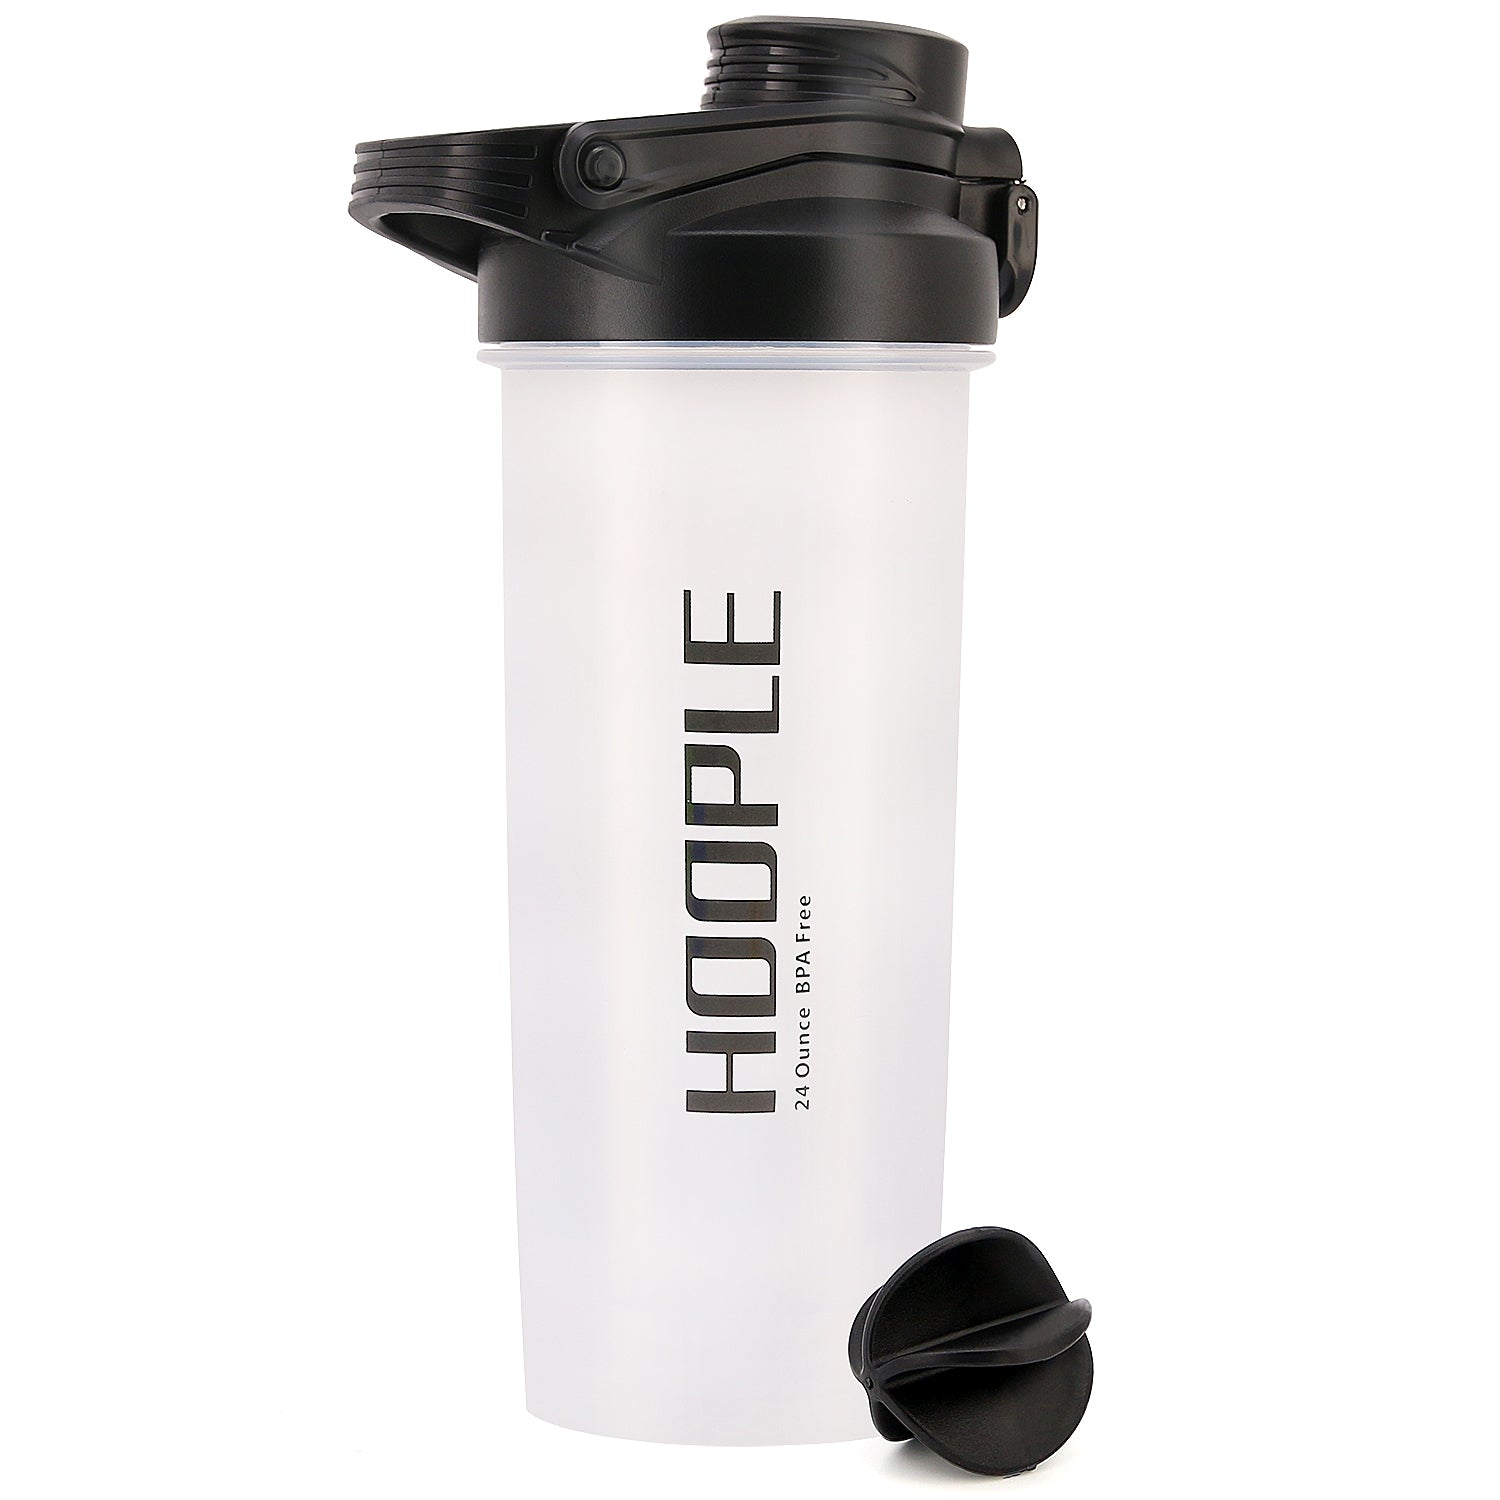 Shake Up Your Supplementation With the Best Shaker Bottles